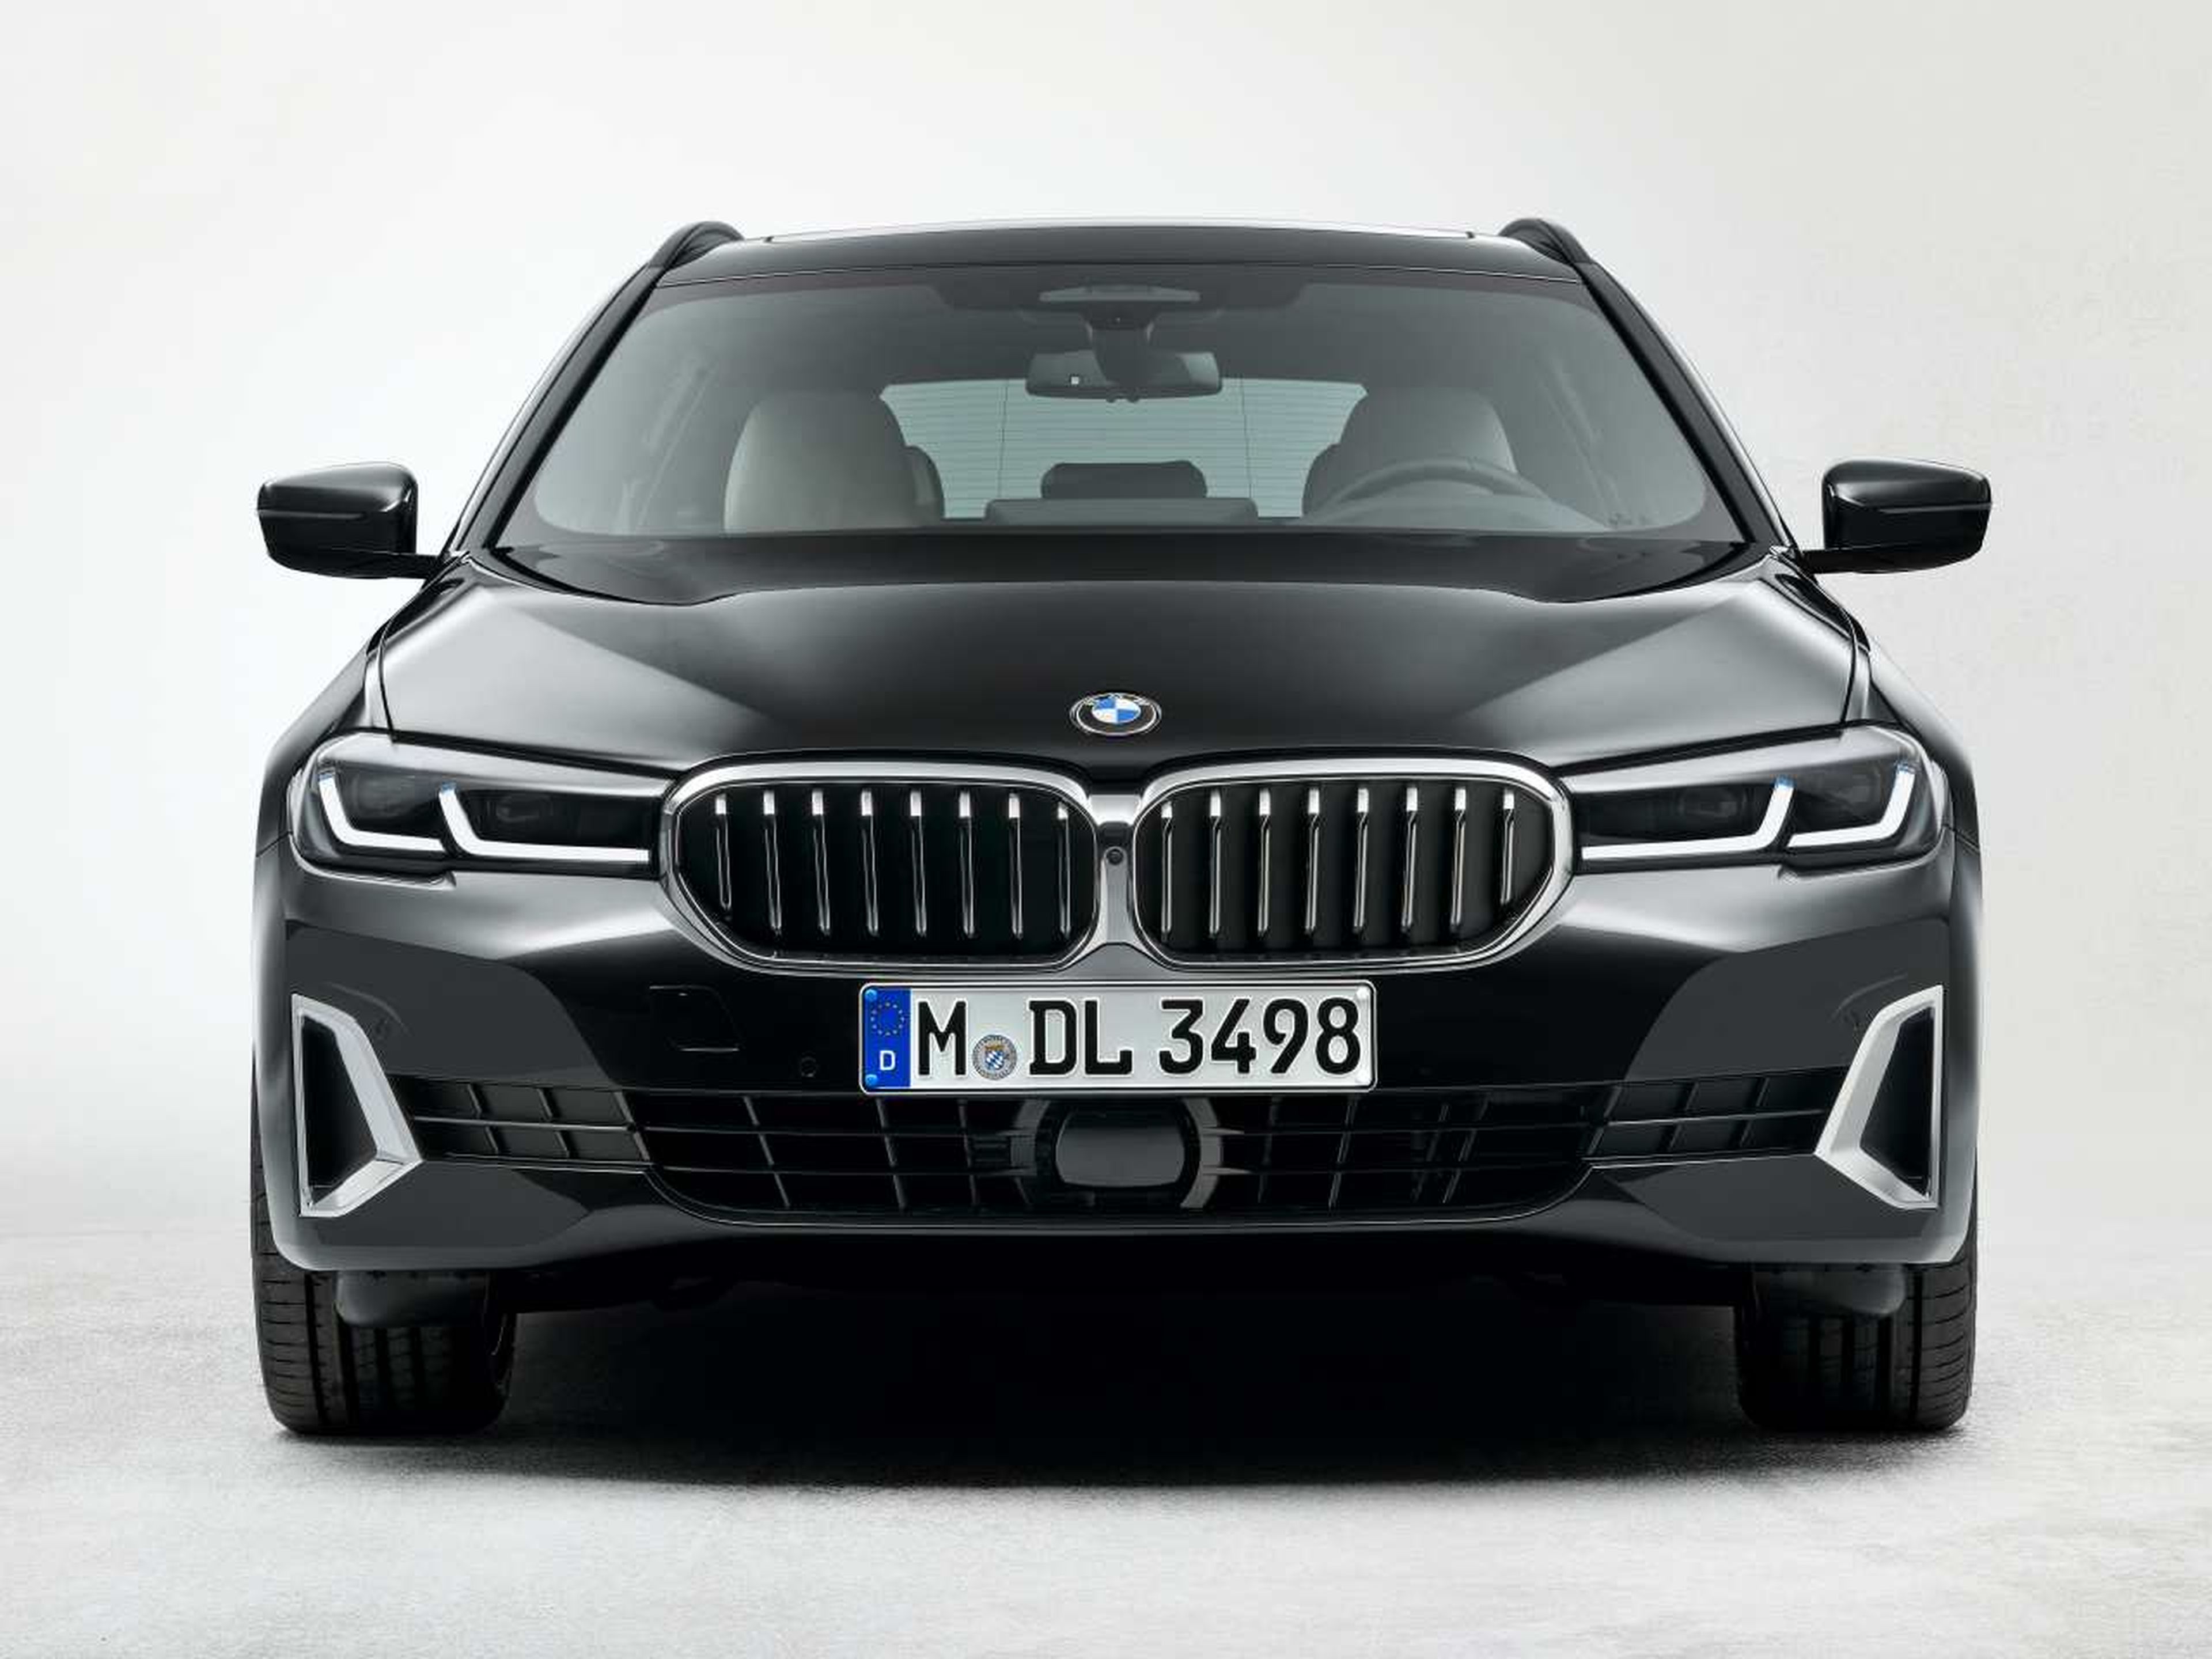 BMW Serie 5 touring frontal